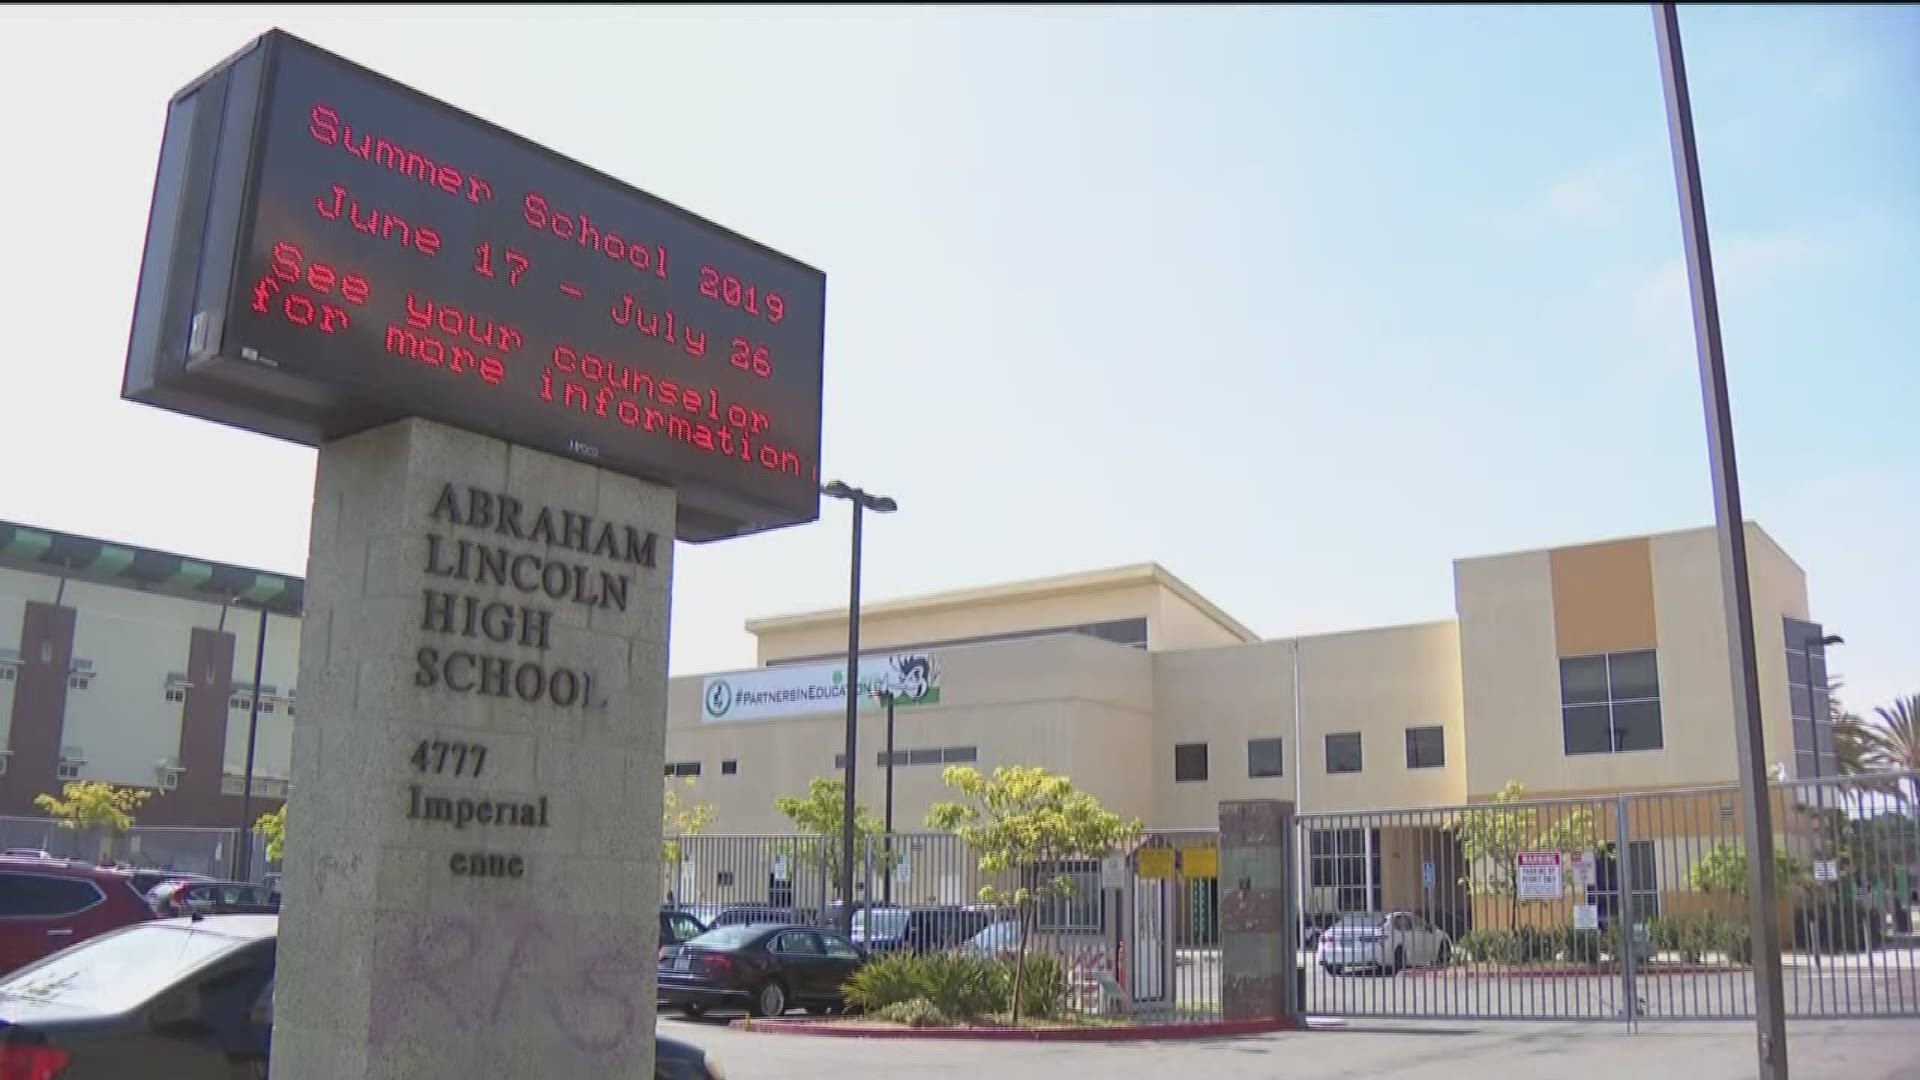 The San Diego Unified School District let go the Lincoln High School principal and three vice-principals saying all four staff members will be replaced but did not provide any detail as to why.